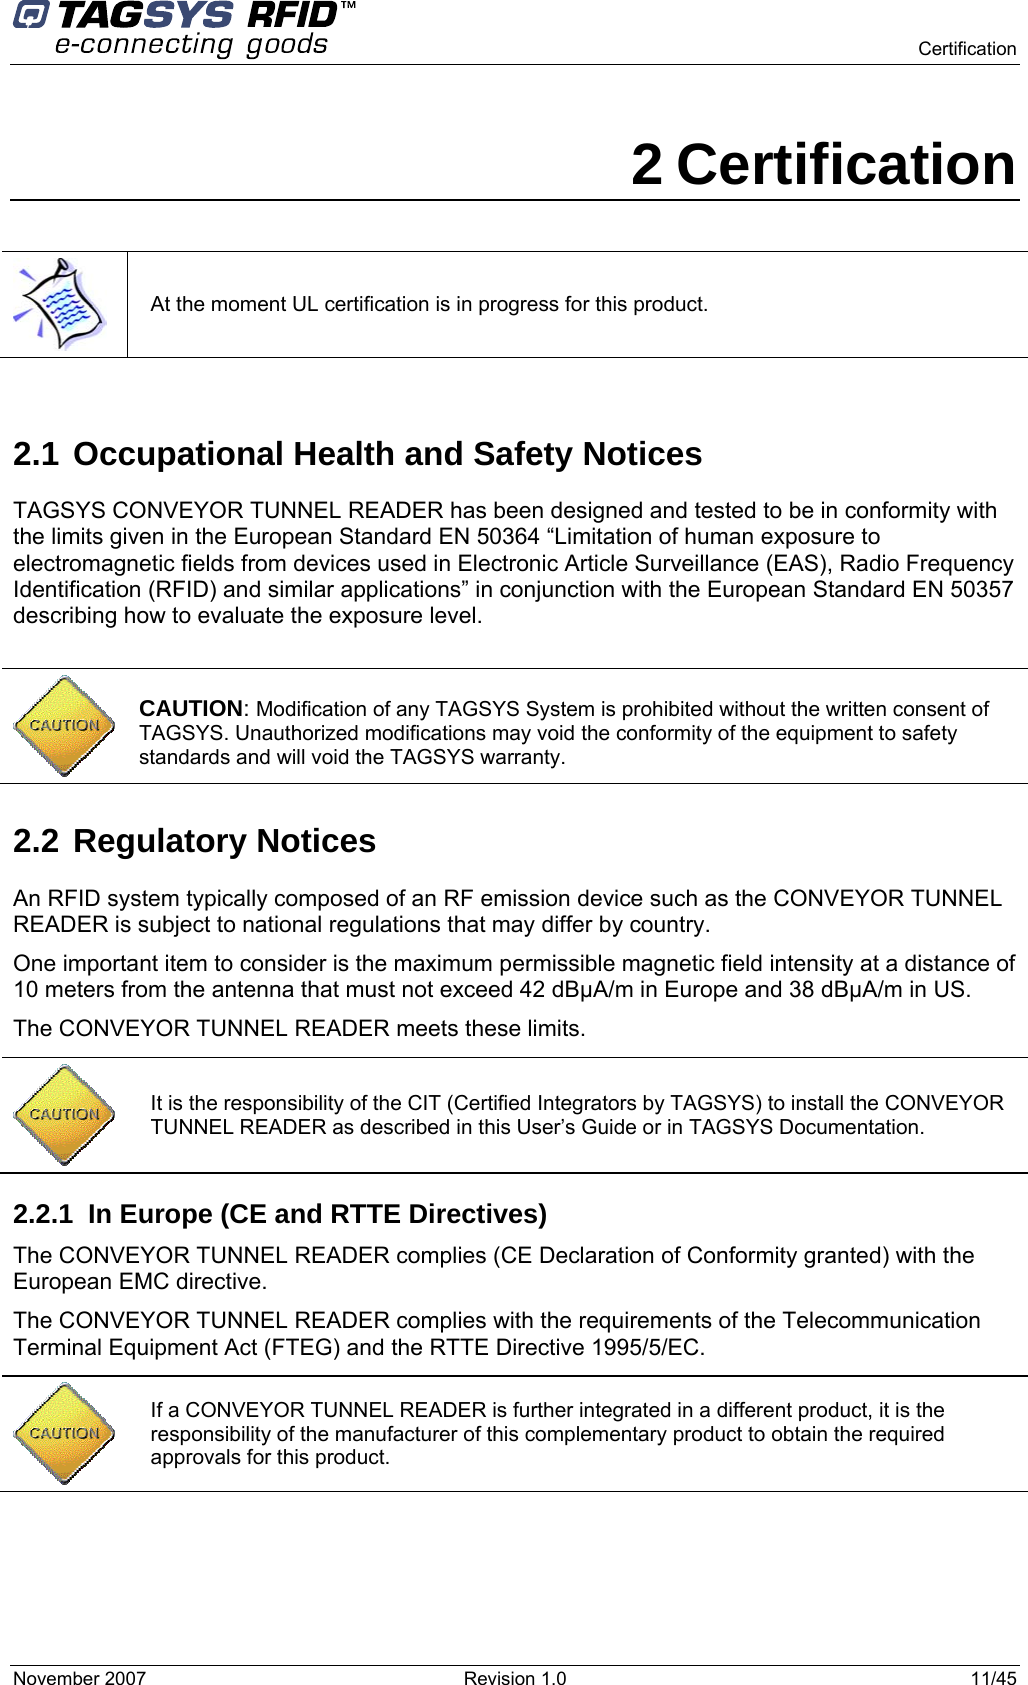    Certification November 2007  Revision 1.0  11/45  2 Certification  At the moment UL certification is in progress for this product.  2.1 Occupational Health and Safety Notices TAGSYS CONVEYOR TUNNEL READER has been designed and tested to be in conformity with the limits given in the European Standard EN 50364 “Limitation of human exposure to electromagnetic fields from devices used in Electronic Article Surveillance (EAS), Radio Frequency Identification (RFID) and similar applications” in conjunction with the European Standard EN 50357 describing how to evaluate the exposure level.   CAUTION: Modification of any TAGSYS System is prohibited without the written consent of TAGSYS. Unauthorized modifications may void the conformity of the equipment to safety standards and will void the TAGSYS warranty. 2.2 Regulatory Notices An RFID system typically composed of an RF emission device such as the CONVEYOR TUNNEL READER is subject to national regulations that may differ by country. One important item to consider is the maximum permissible magnetic field intensity at a distance of 10 meters from the antenna that must not exceed 42 dBµA/m in Europe and 38 dBµA/m in US. The CONVEYOR TUNNEL READER meets these limits. 2.2.1  In Europe (CE and RTTE Directives)  The CONVEYOR TUNNEL READER complies (CE Declaration of Conformity granted) with the European EMC directive. The CONVEYOR TUNNEL READER complies with the requirements of the Telecommunication Terminal Equipment Act (FTEG) and the RTTE Directive 1995/5/EC.  It is the responsibility of the CIT (Certified Integrators by TAGSYS) to install the CONVEYOR TUNNEL READER as described in this User’s Guide or in TAGSYS Documentation.  If a CONVEYOR TUNNEL READER is further integrated in a different product, it is the responsibility of the manufacturer of this complementary product to obtain the required approvals for this product. 